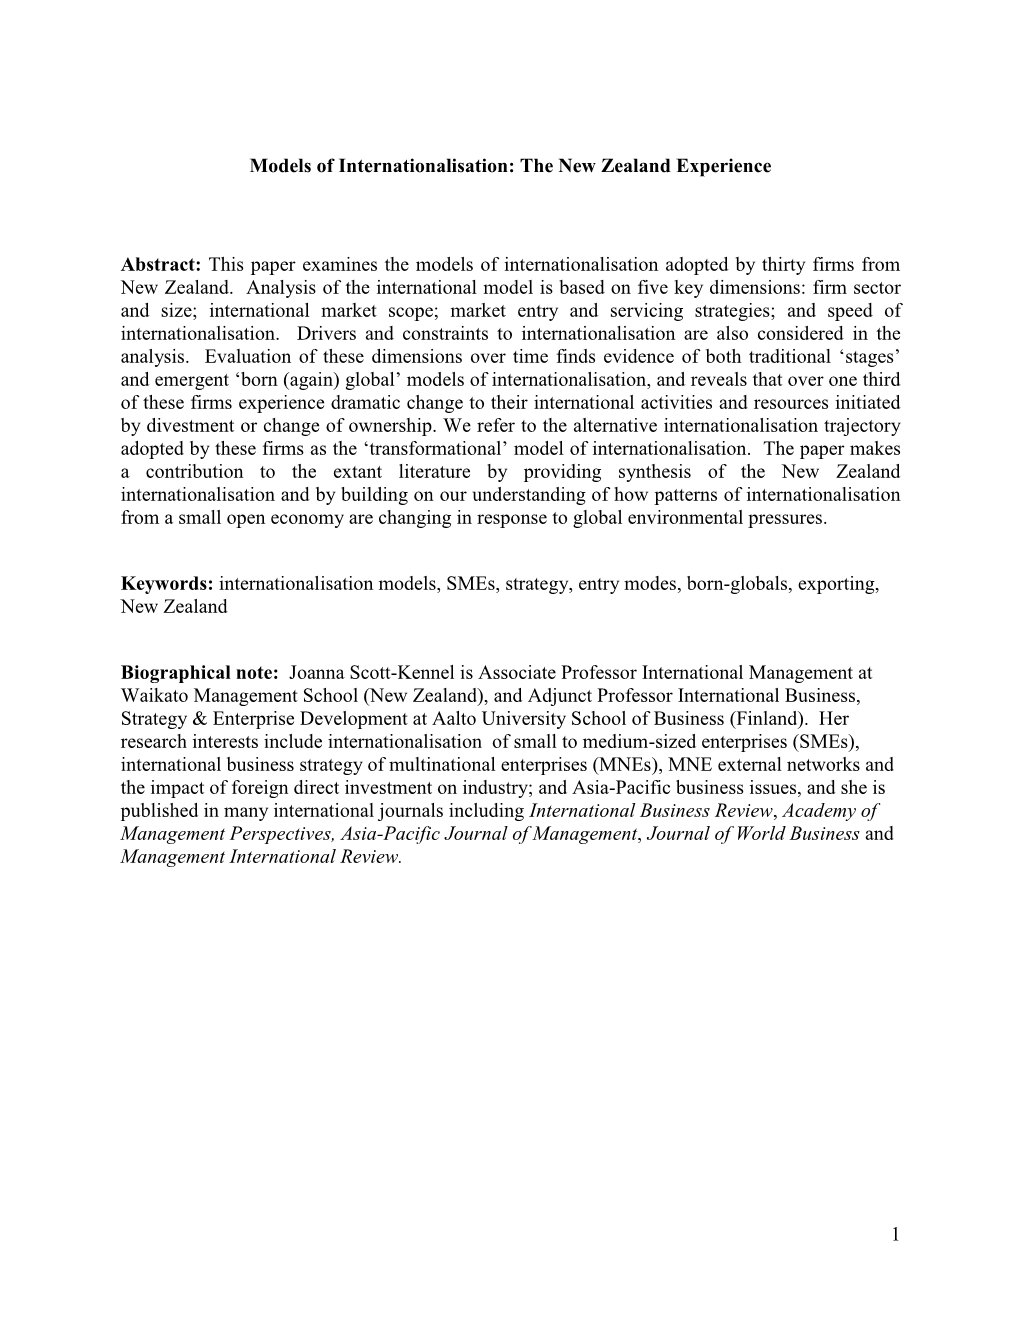 The New Zealand Experience Abstract: This Paper Examines the Models of Internationalisation Ad